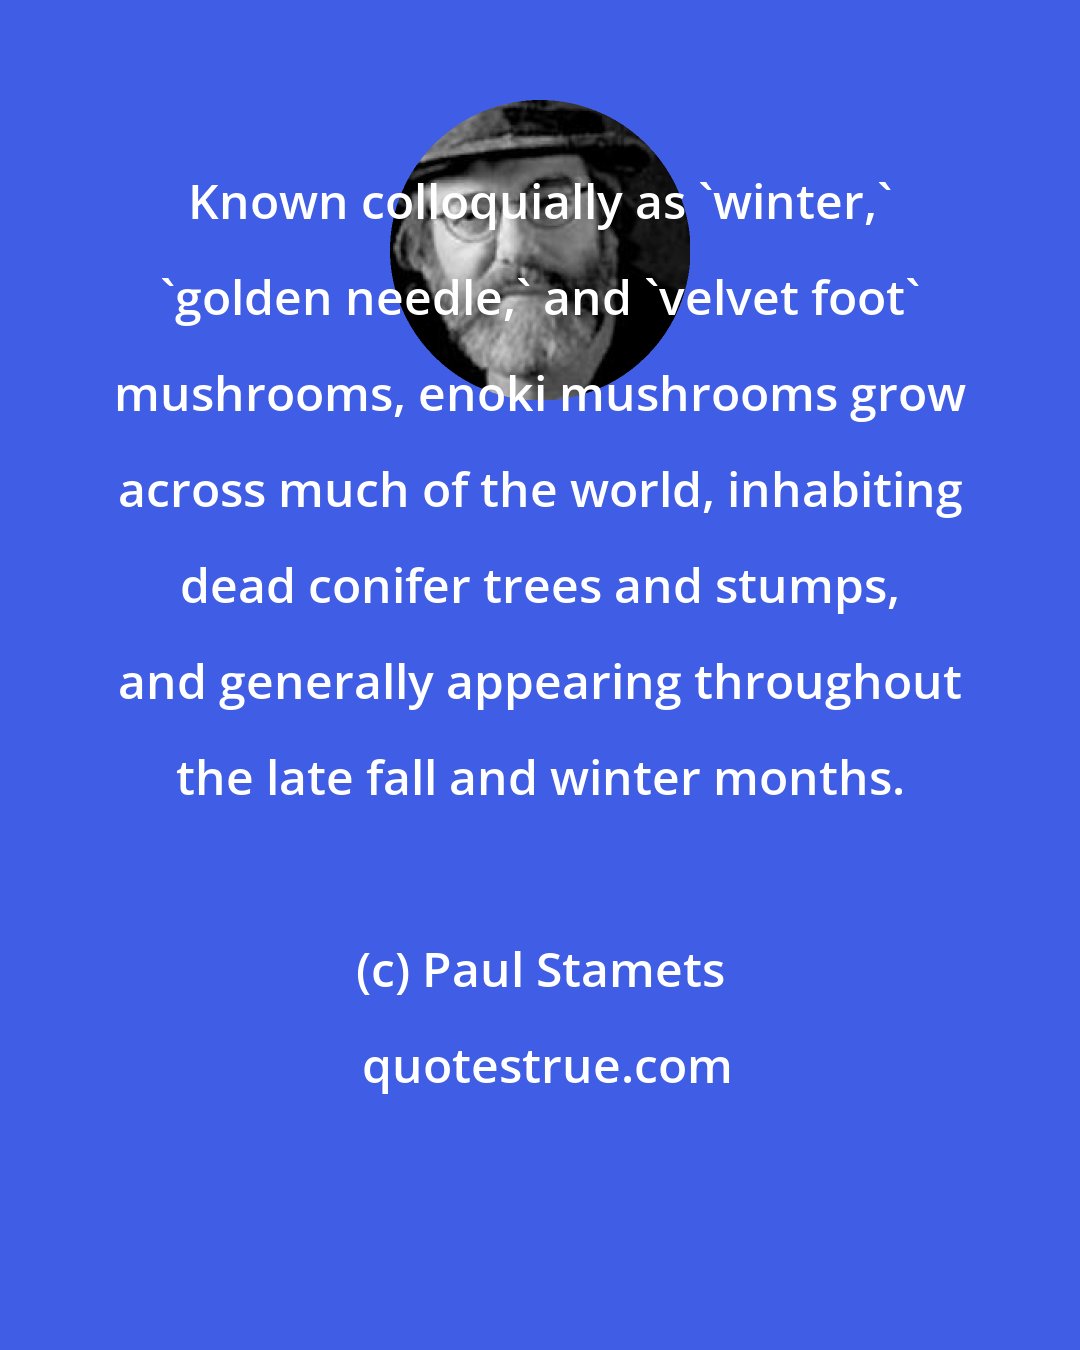 Paul Stamets: Known colloquially as 'winter,' 'golden needle,' and 'velvet foot' mushrooms, enoki mushrooms grow across much of the world, inhabiting dead conifer trees and stumps, and generally appearing throughout the late fall and winter months.